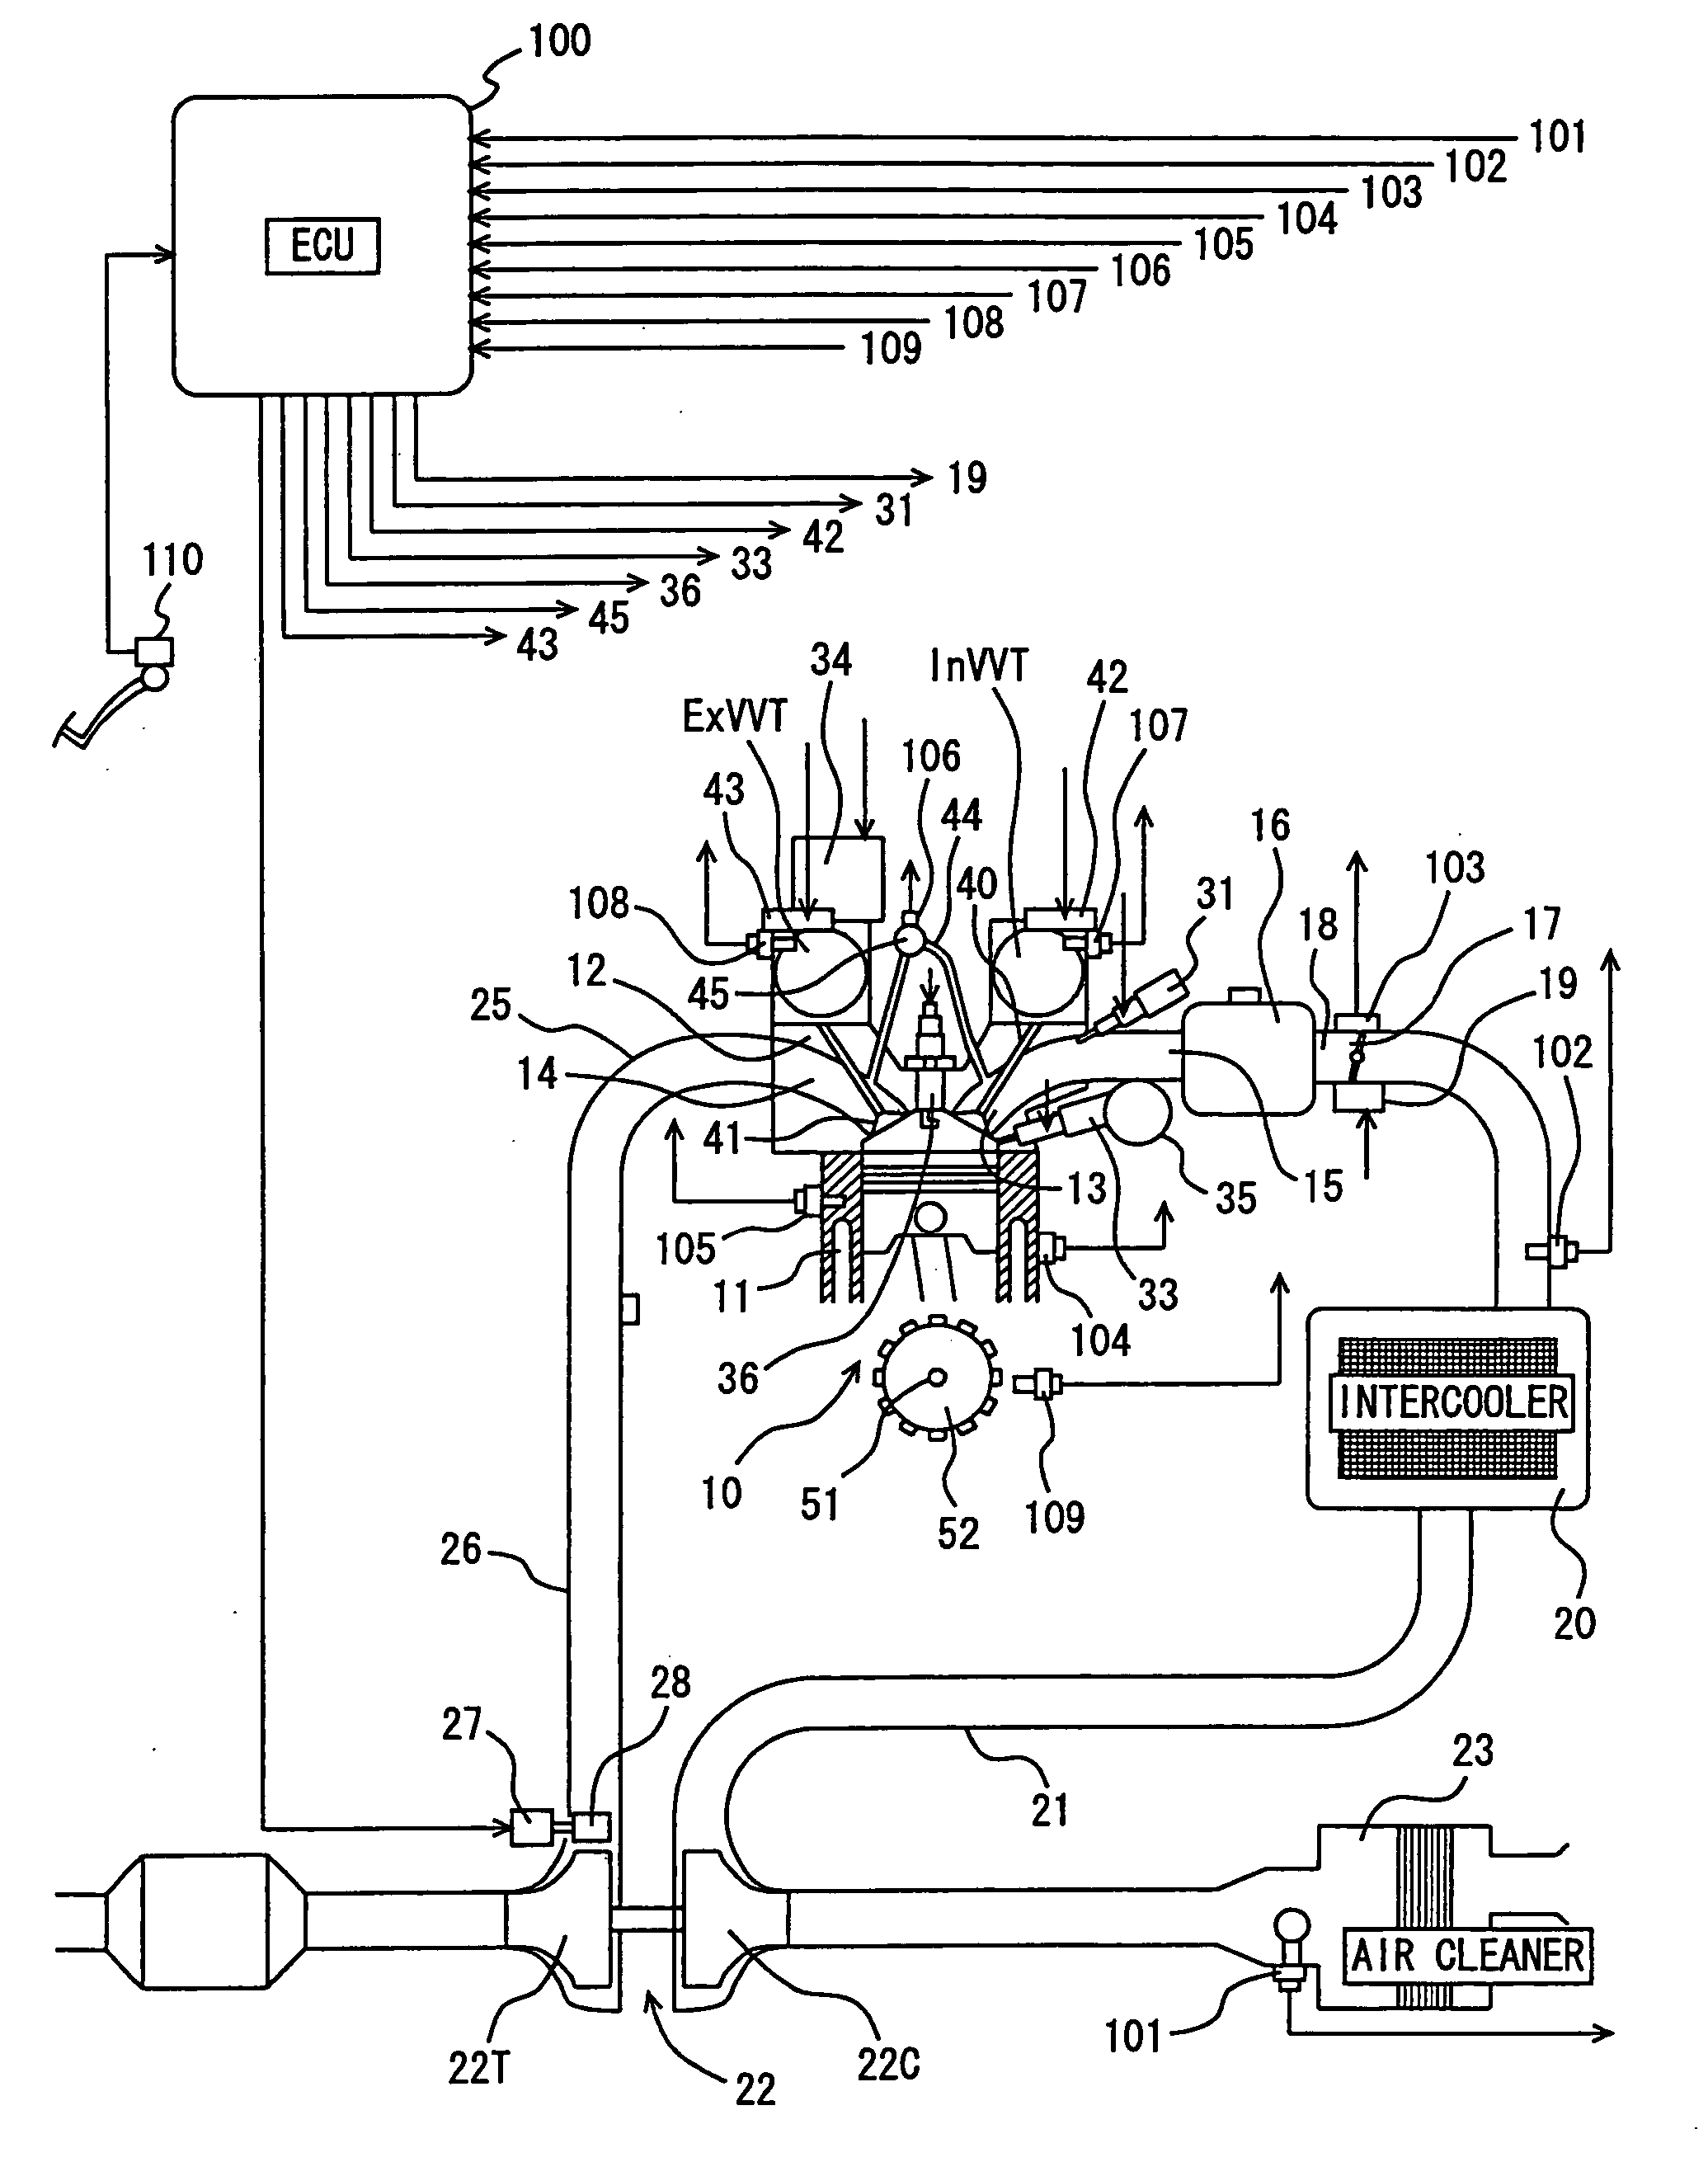 Ignition timing control apparatus for internal combustion engine